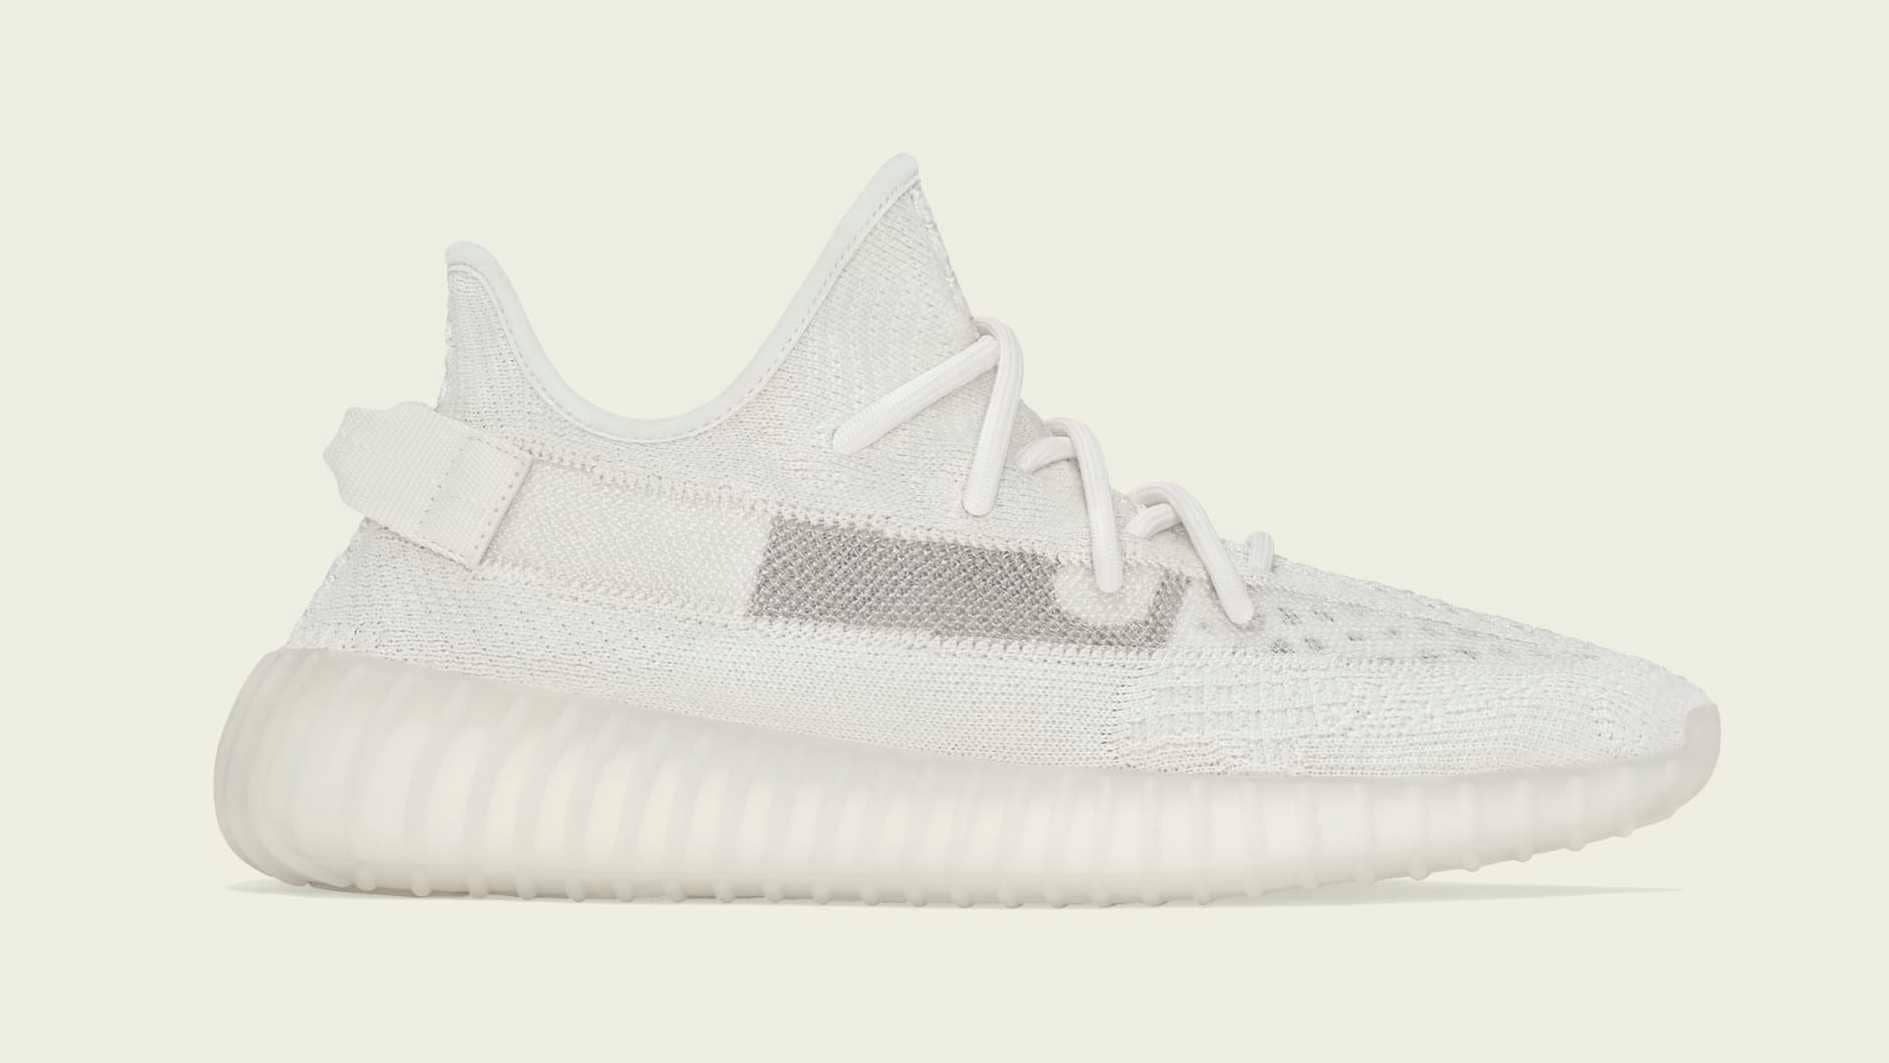 Latest Yeezy Boost 350 Trainer Releases & Next Drops